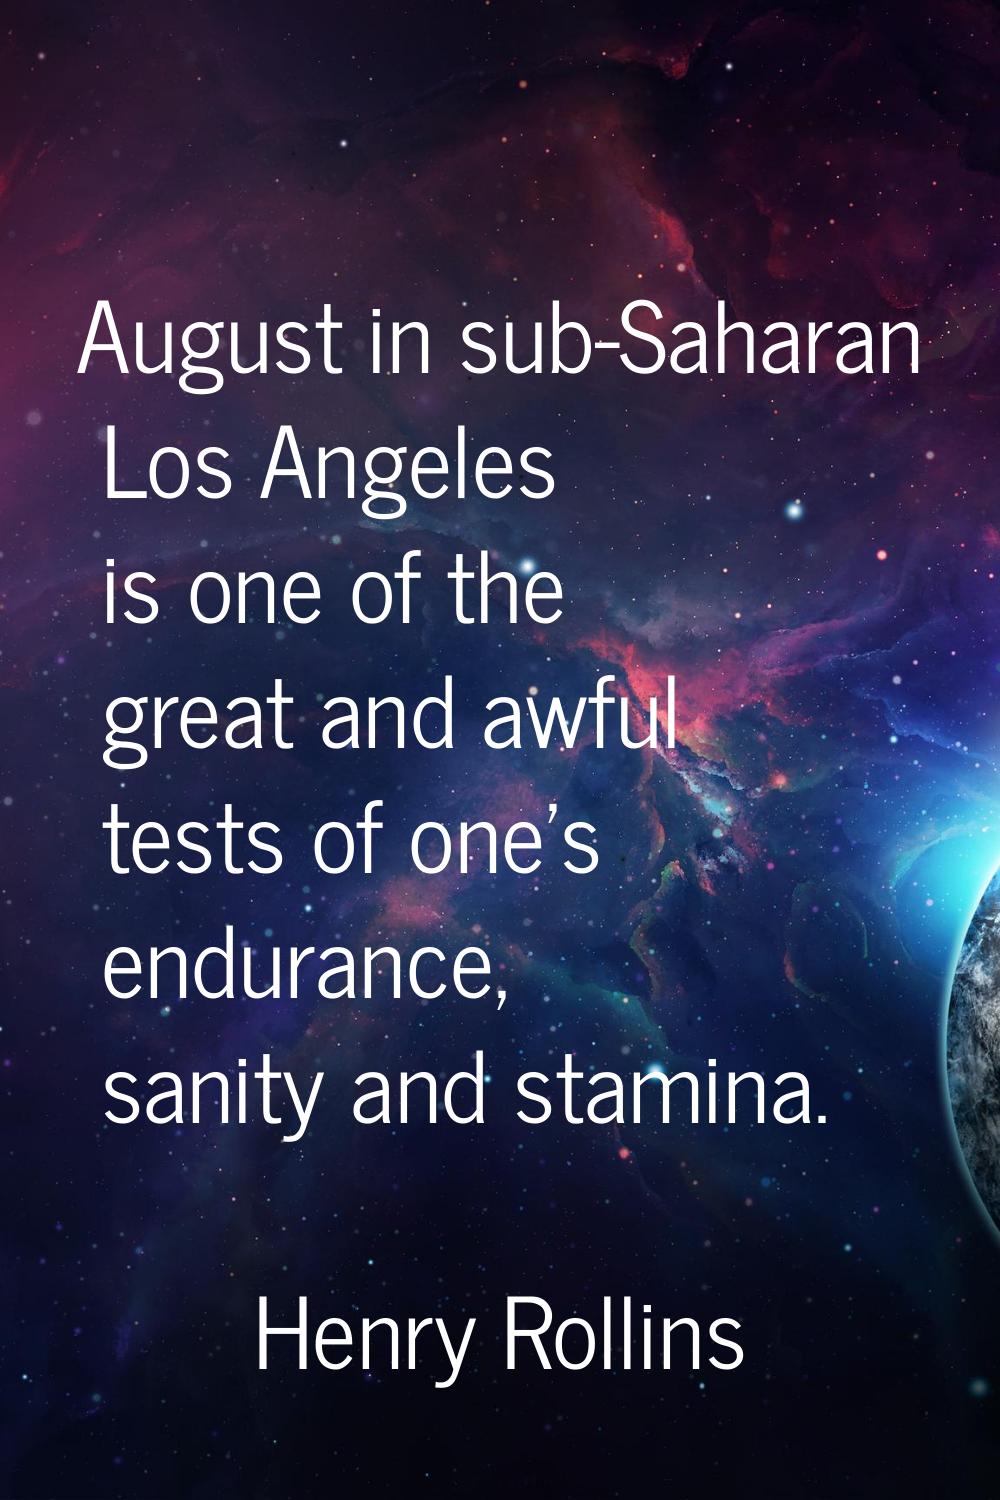 August in sub-Saharan Los Angeles is one of the great and awful tests of one's endurance, sanity an